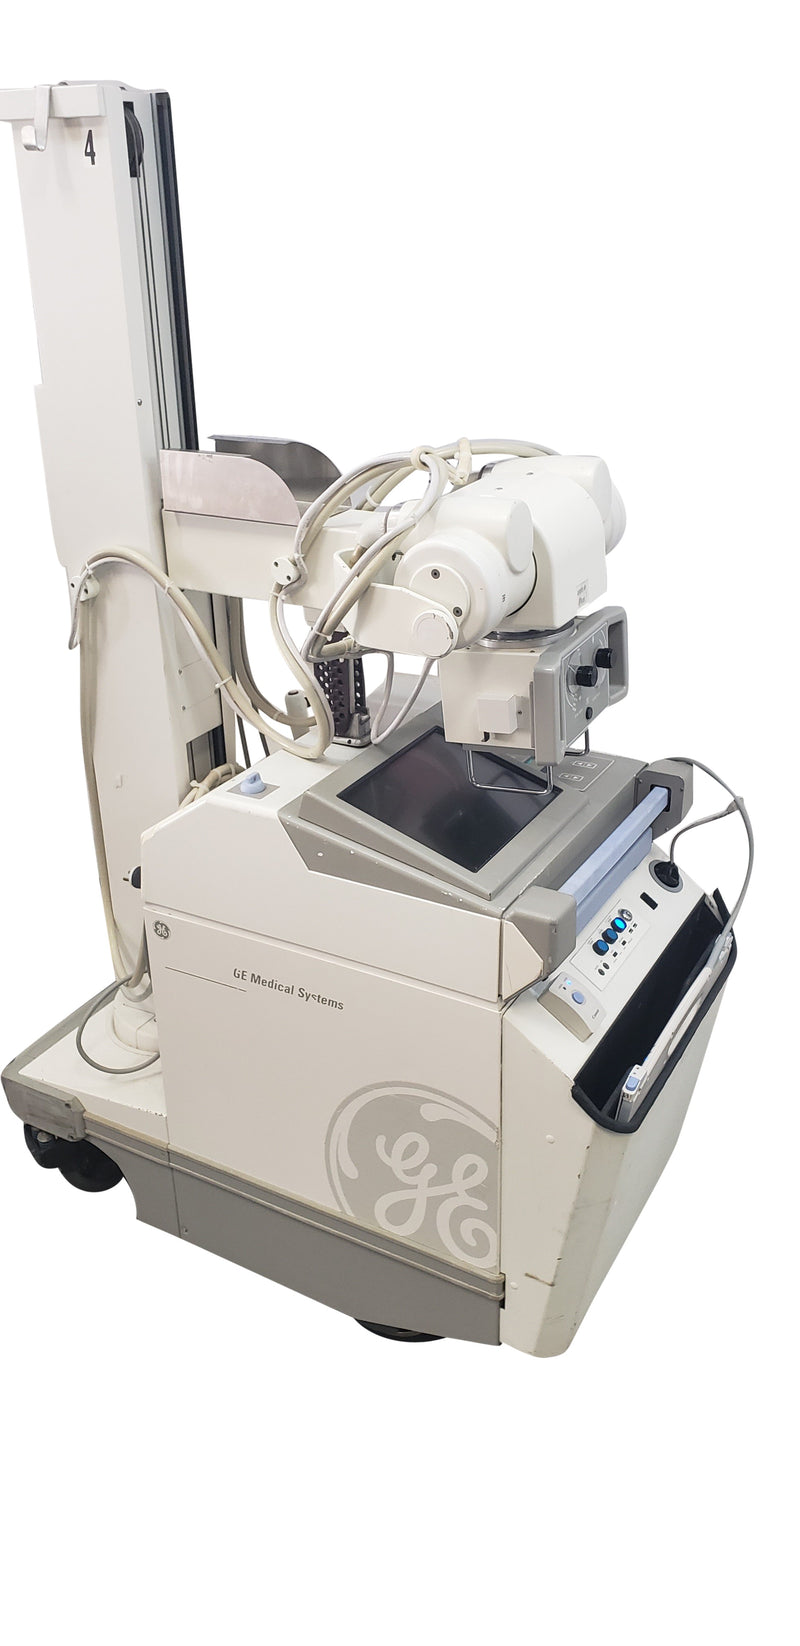 DIGITAL DR GE AMX IV PORTABLE X-RAY with Canon CXDI-55C Detector